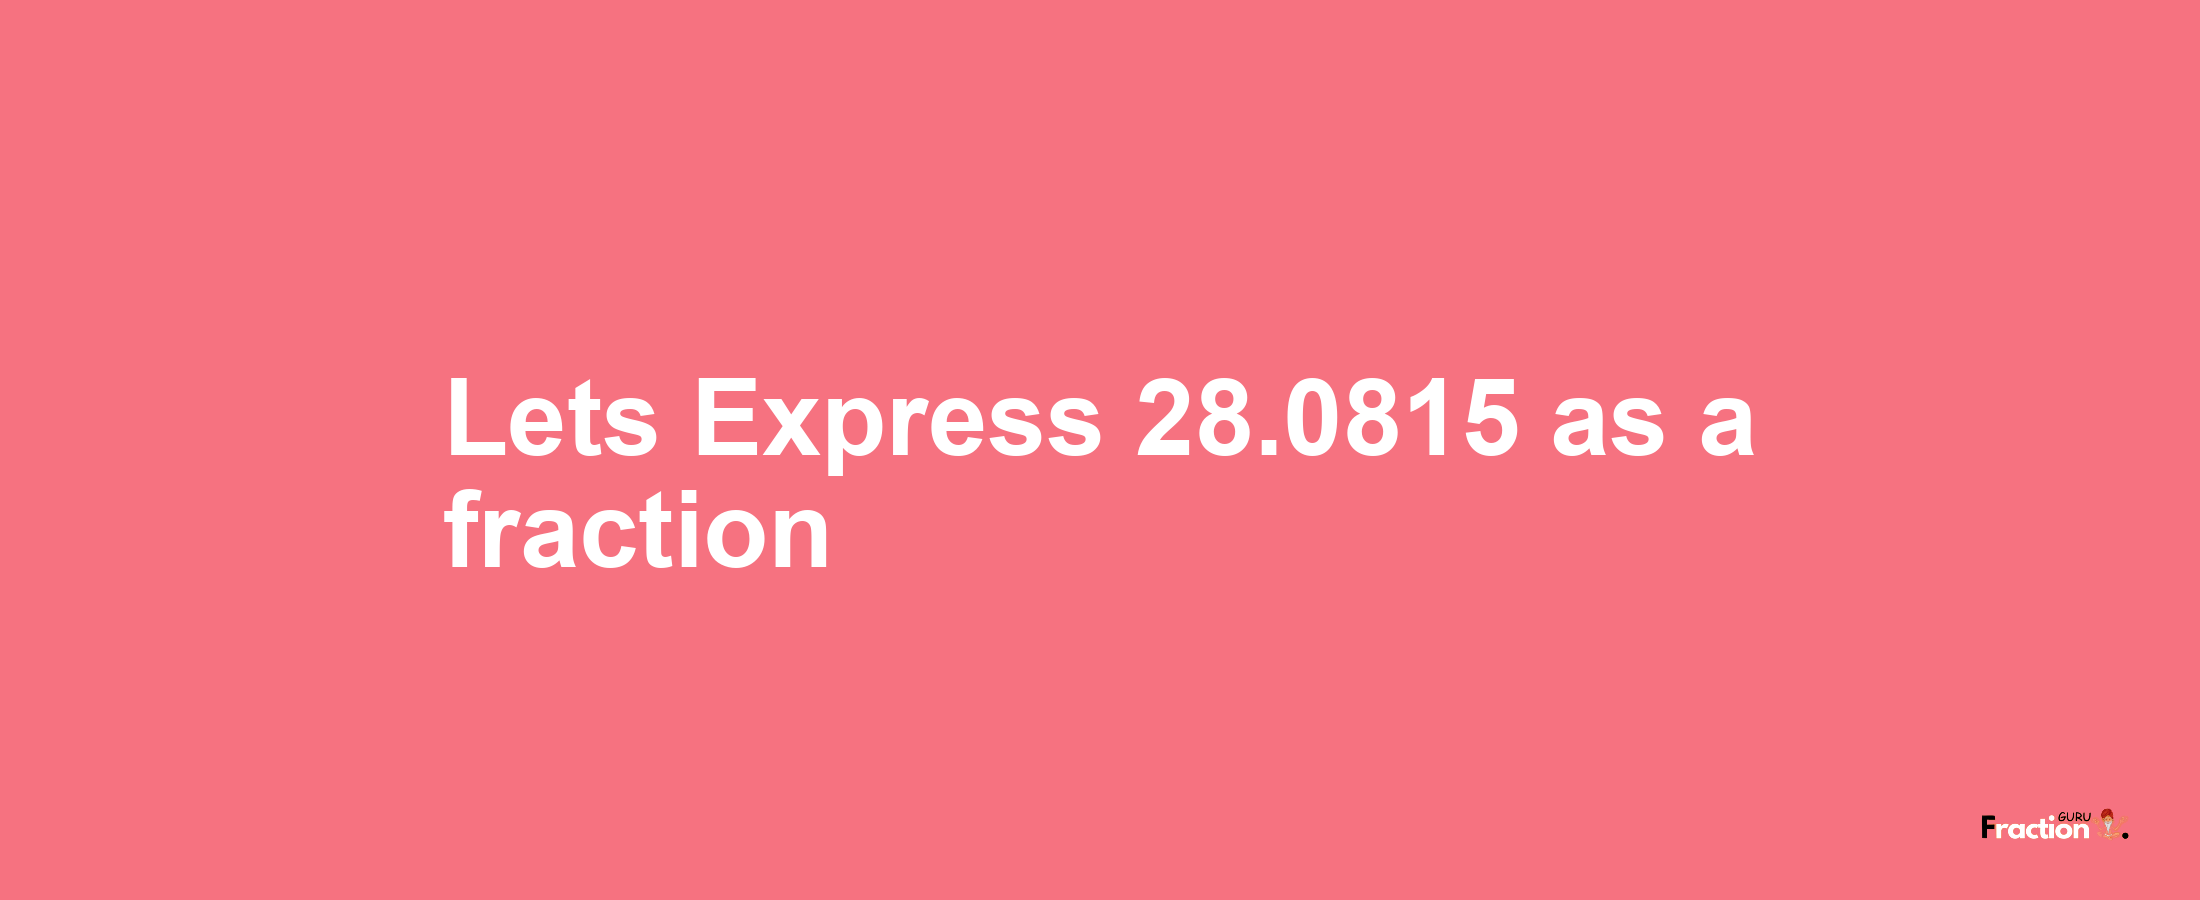 Lets Express 28.0815 as afraction